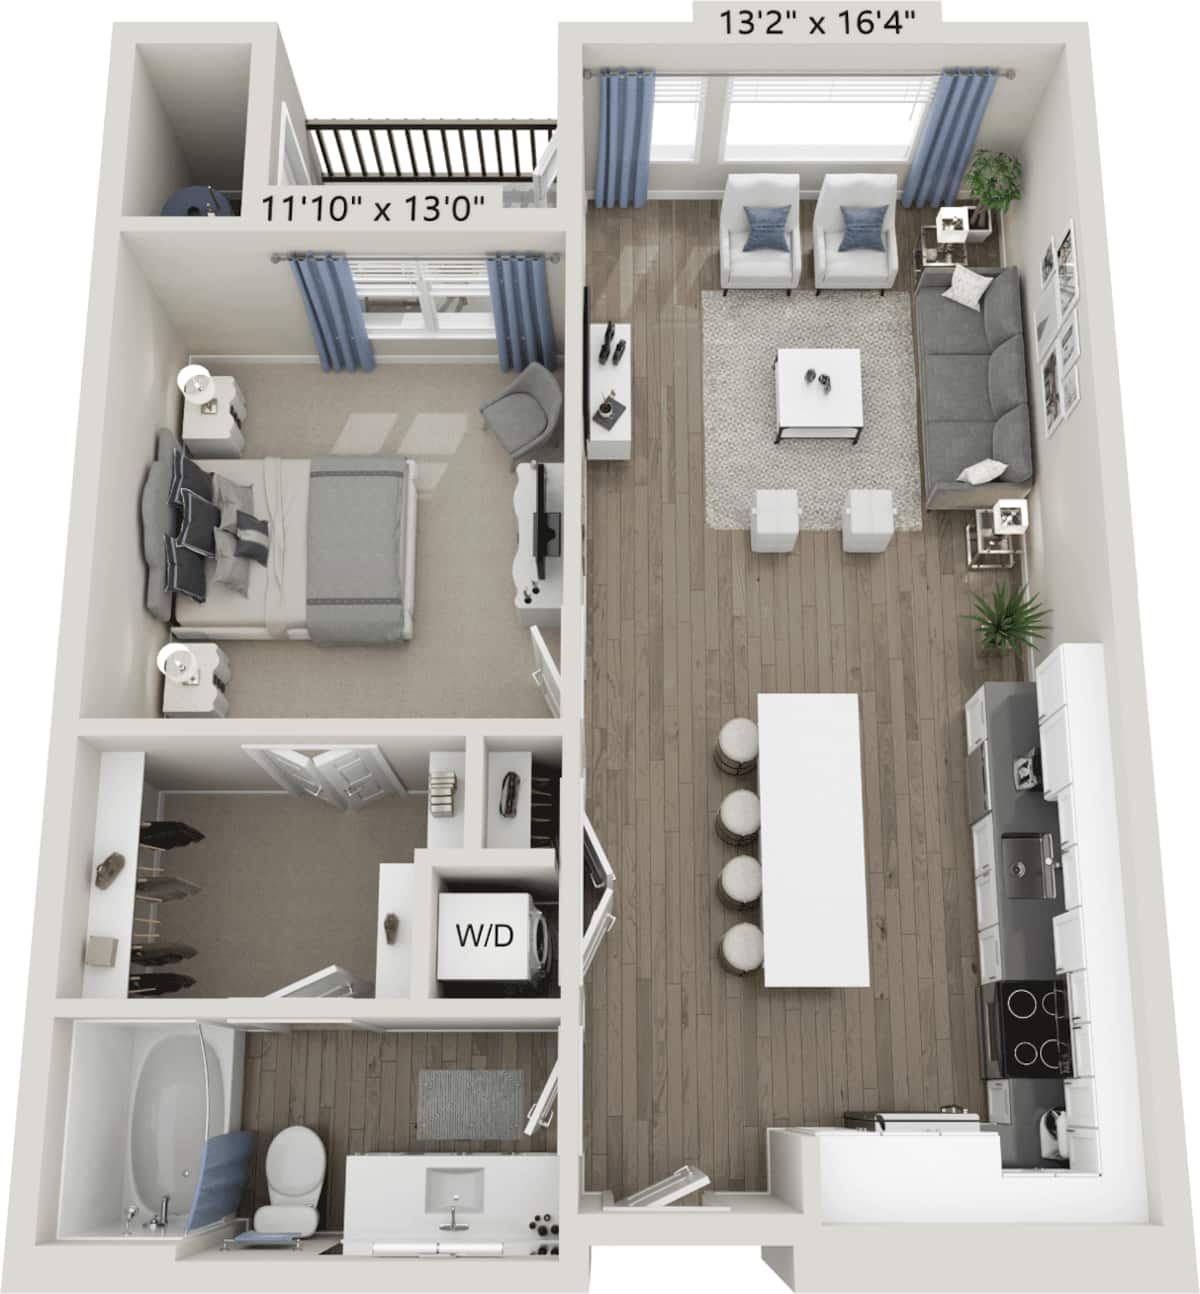 Floorplan diagram for A4 Realm, showing 1 bedroom